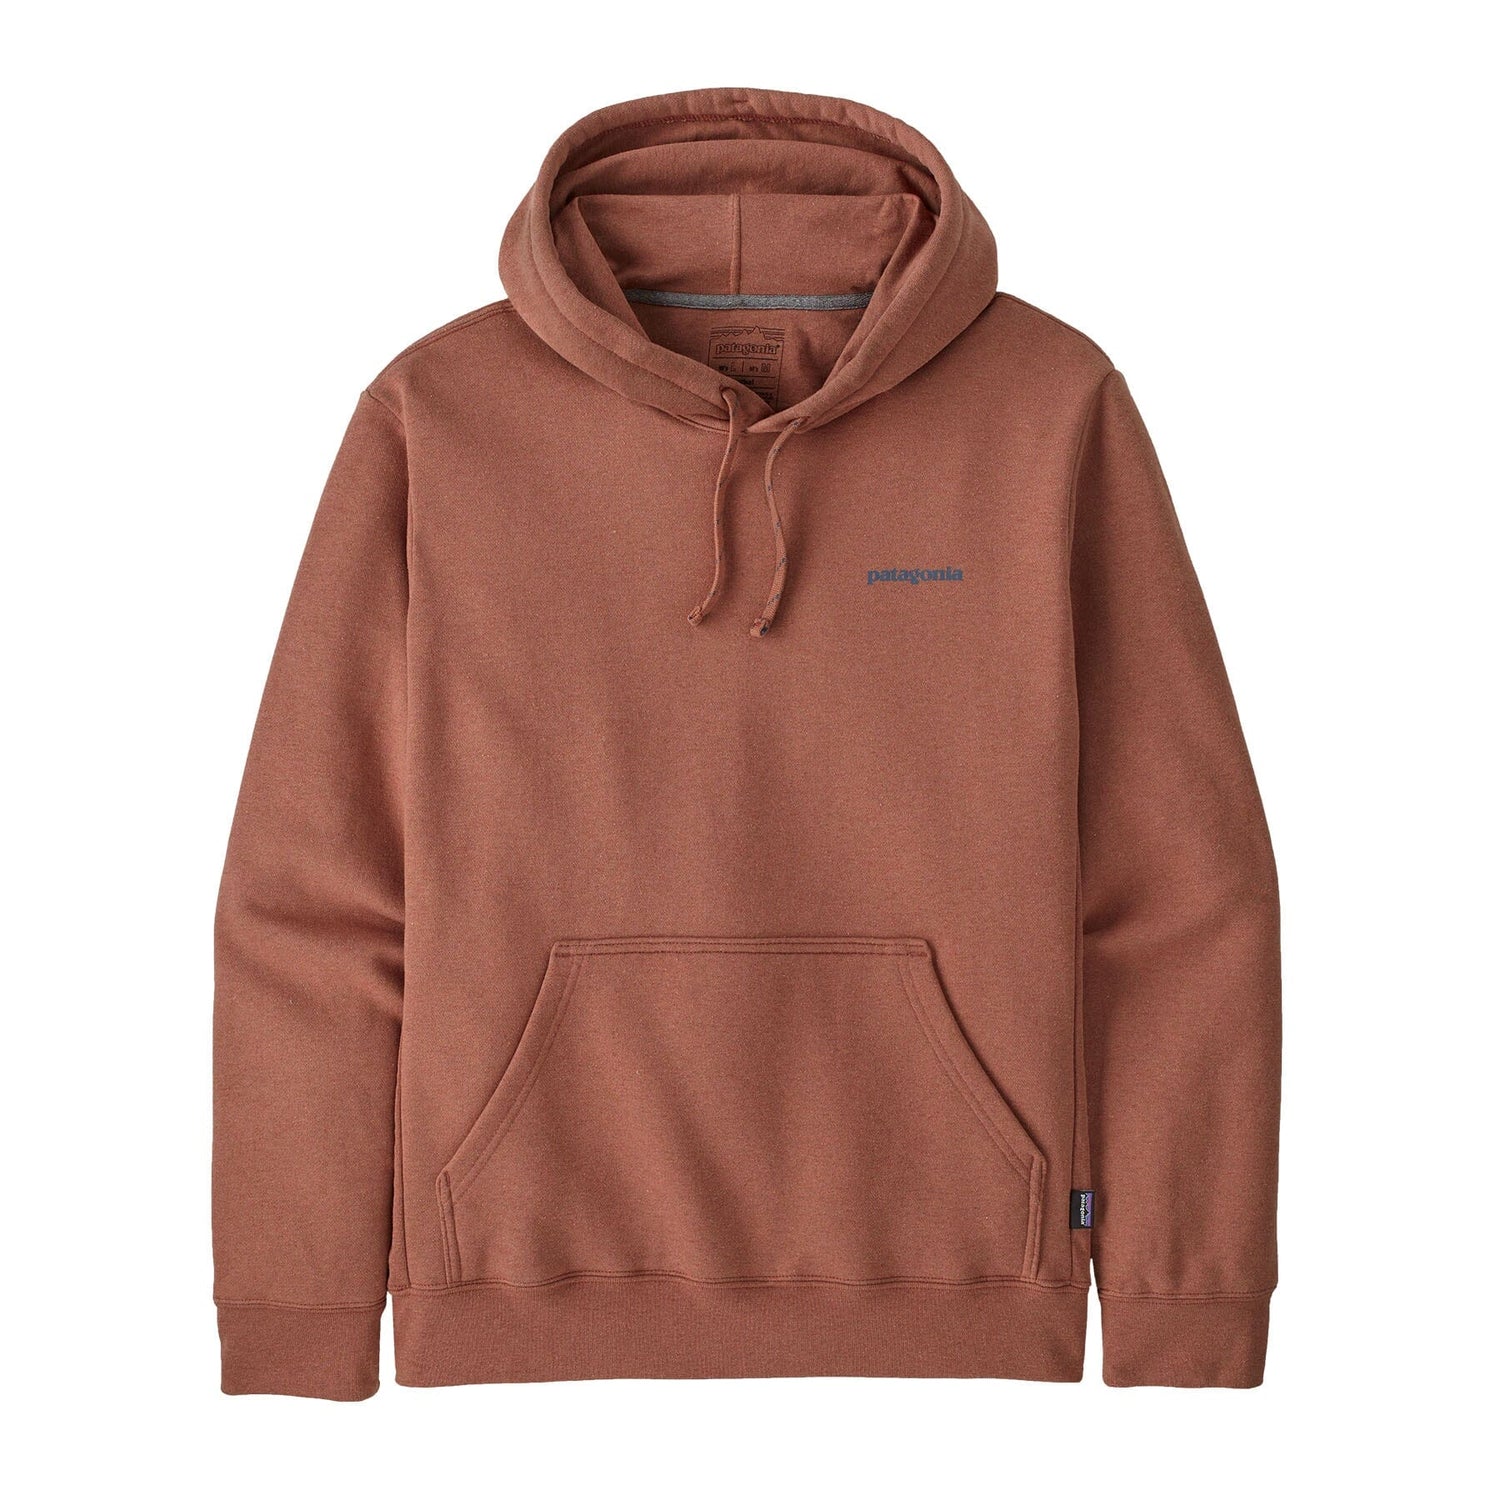 Patagonia Boardshort Logo Uprisal Hoody - Recycled polyester & recycled cotton fleece Sienna Clay Shirt